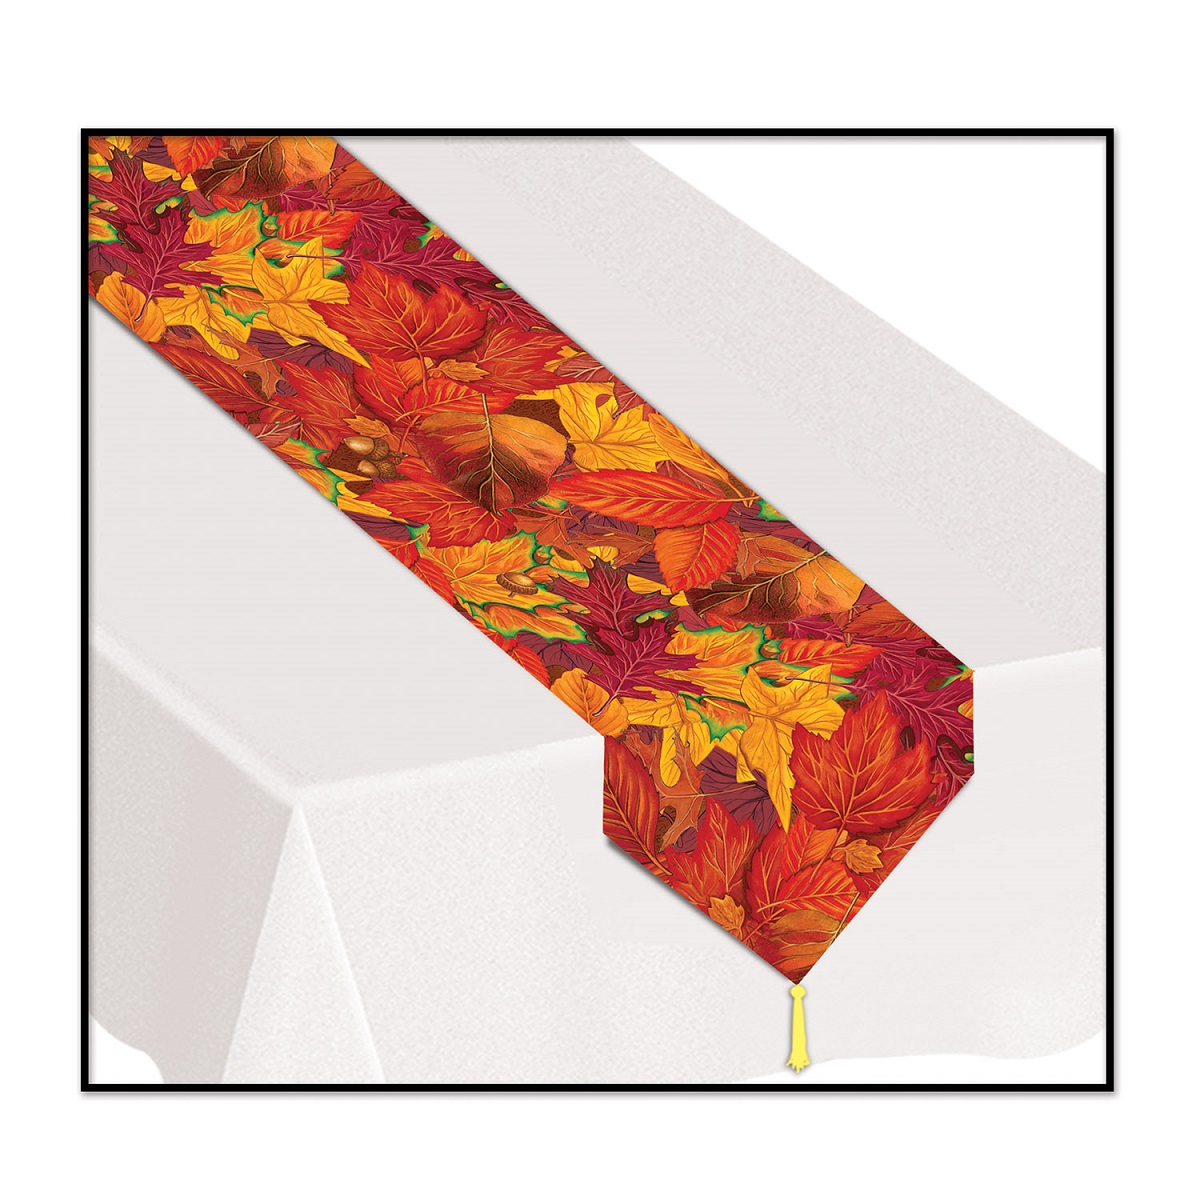 Beistle Club Pack of 12 Brown Fall Leaf Disposable Banquet Party Table Runners 6'